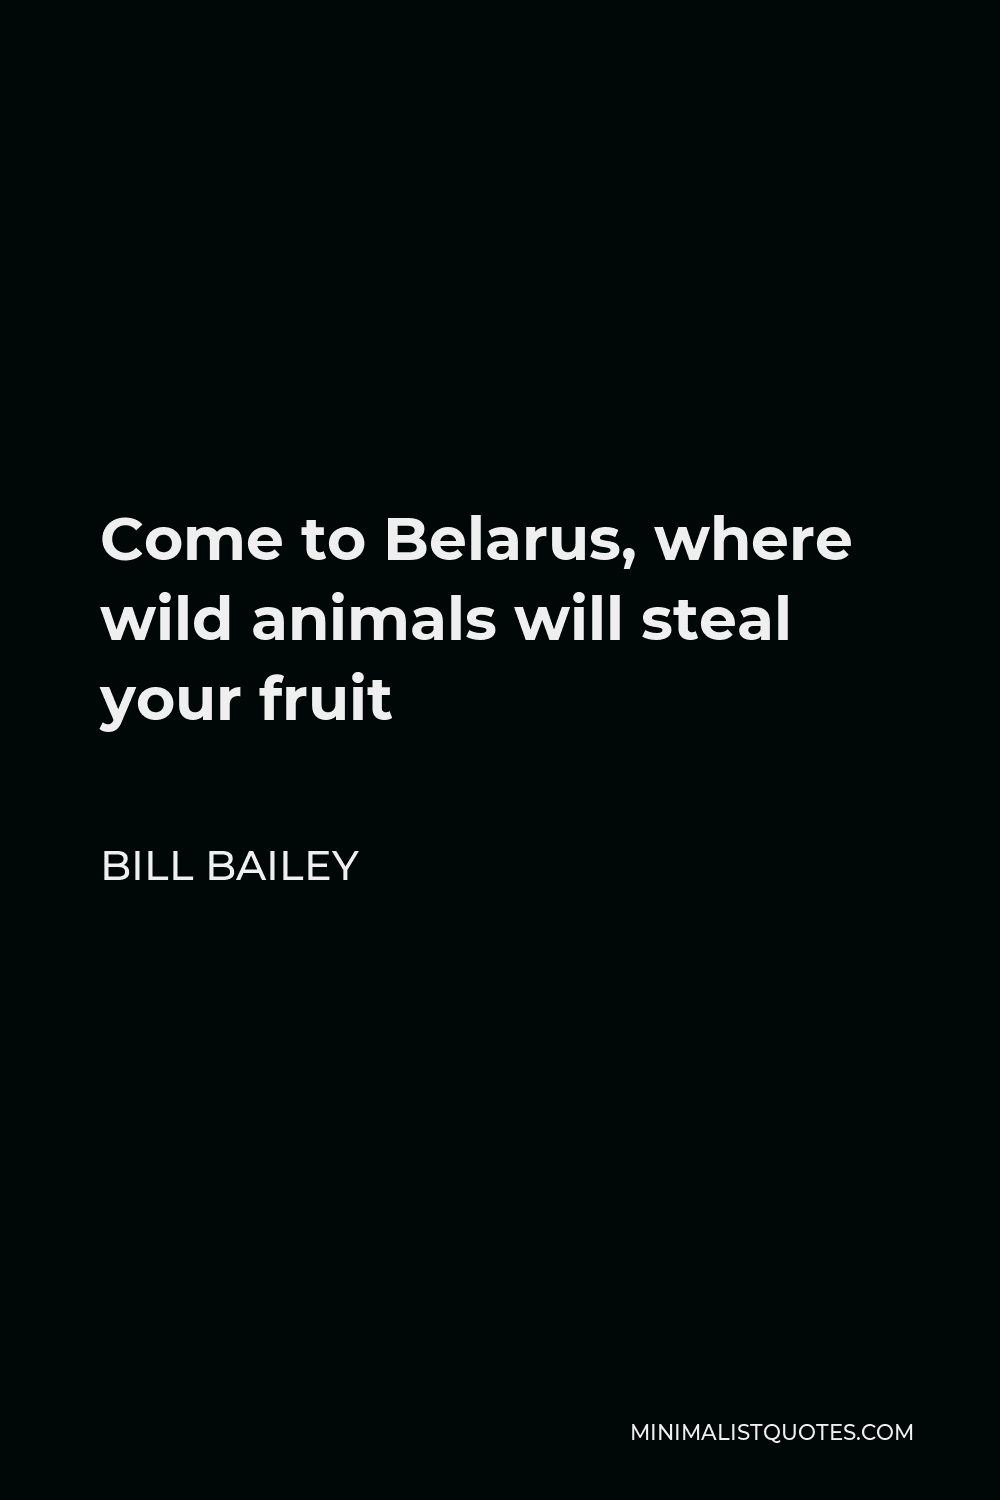 Bill Bailey Quote - Come to Belarus, where wild animals will steal your fruit